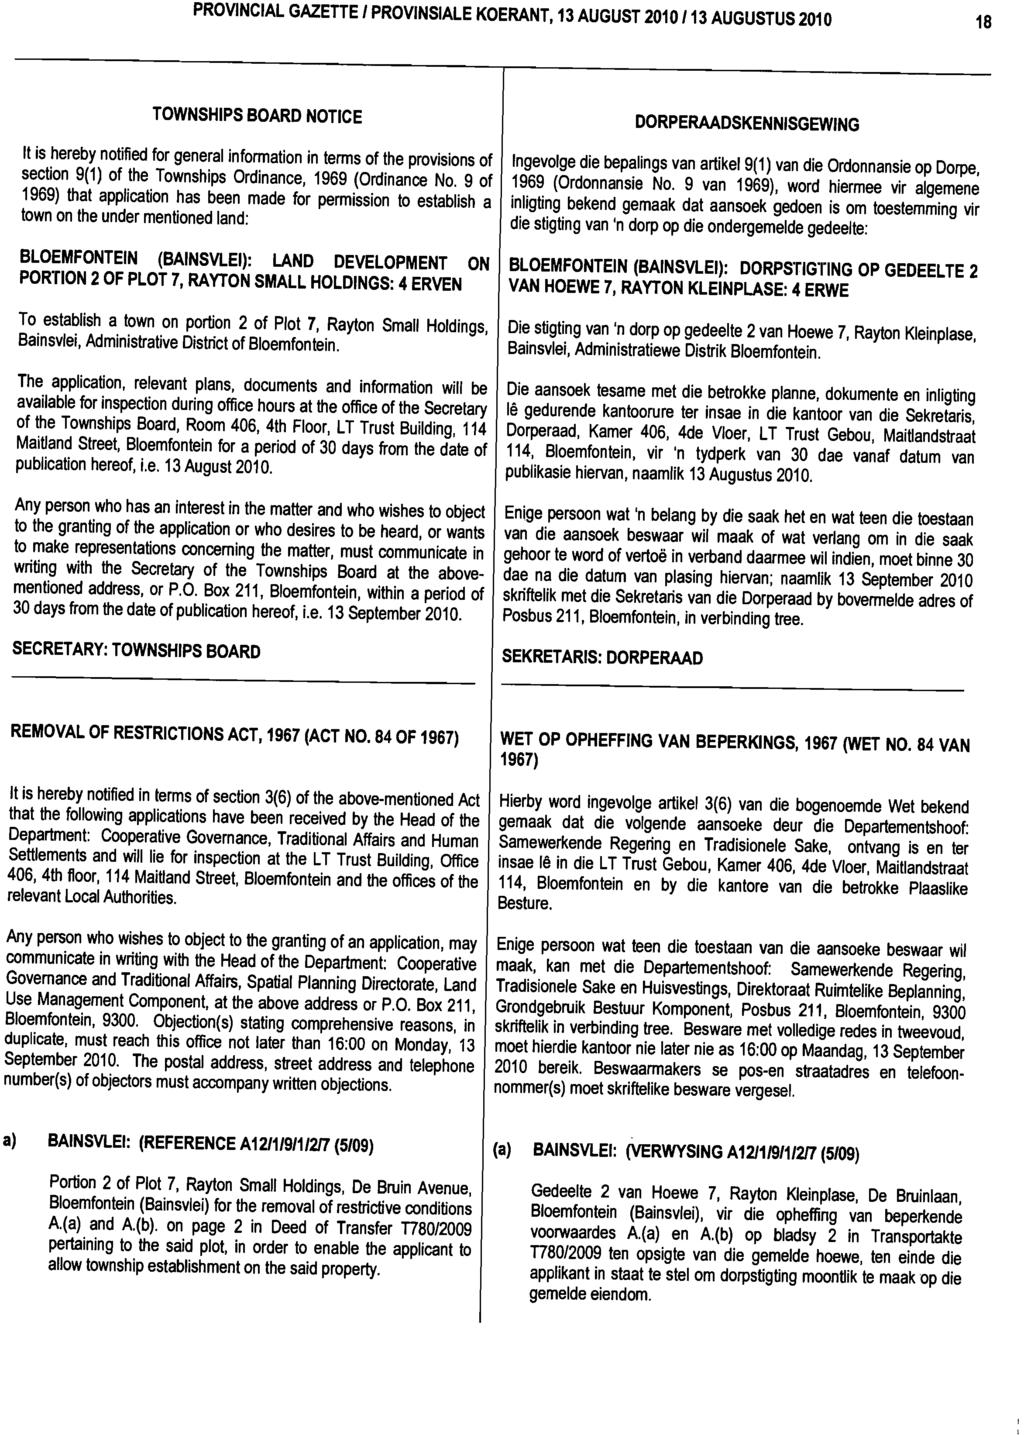 PROVINCIAL GAZmE I PROVINSIALE KOERANT, 13 AUGUST 2010 113 AUGUSTUS 2010 18 TOWNSHIPS BOARD NOTICE It is hereby notified for general information in terms of the provisions of section 9(1) of the